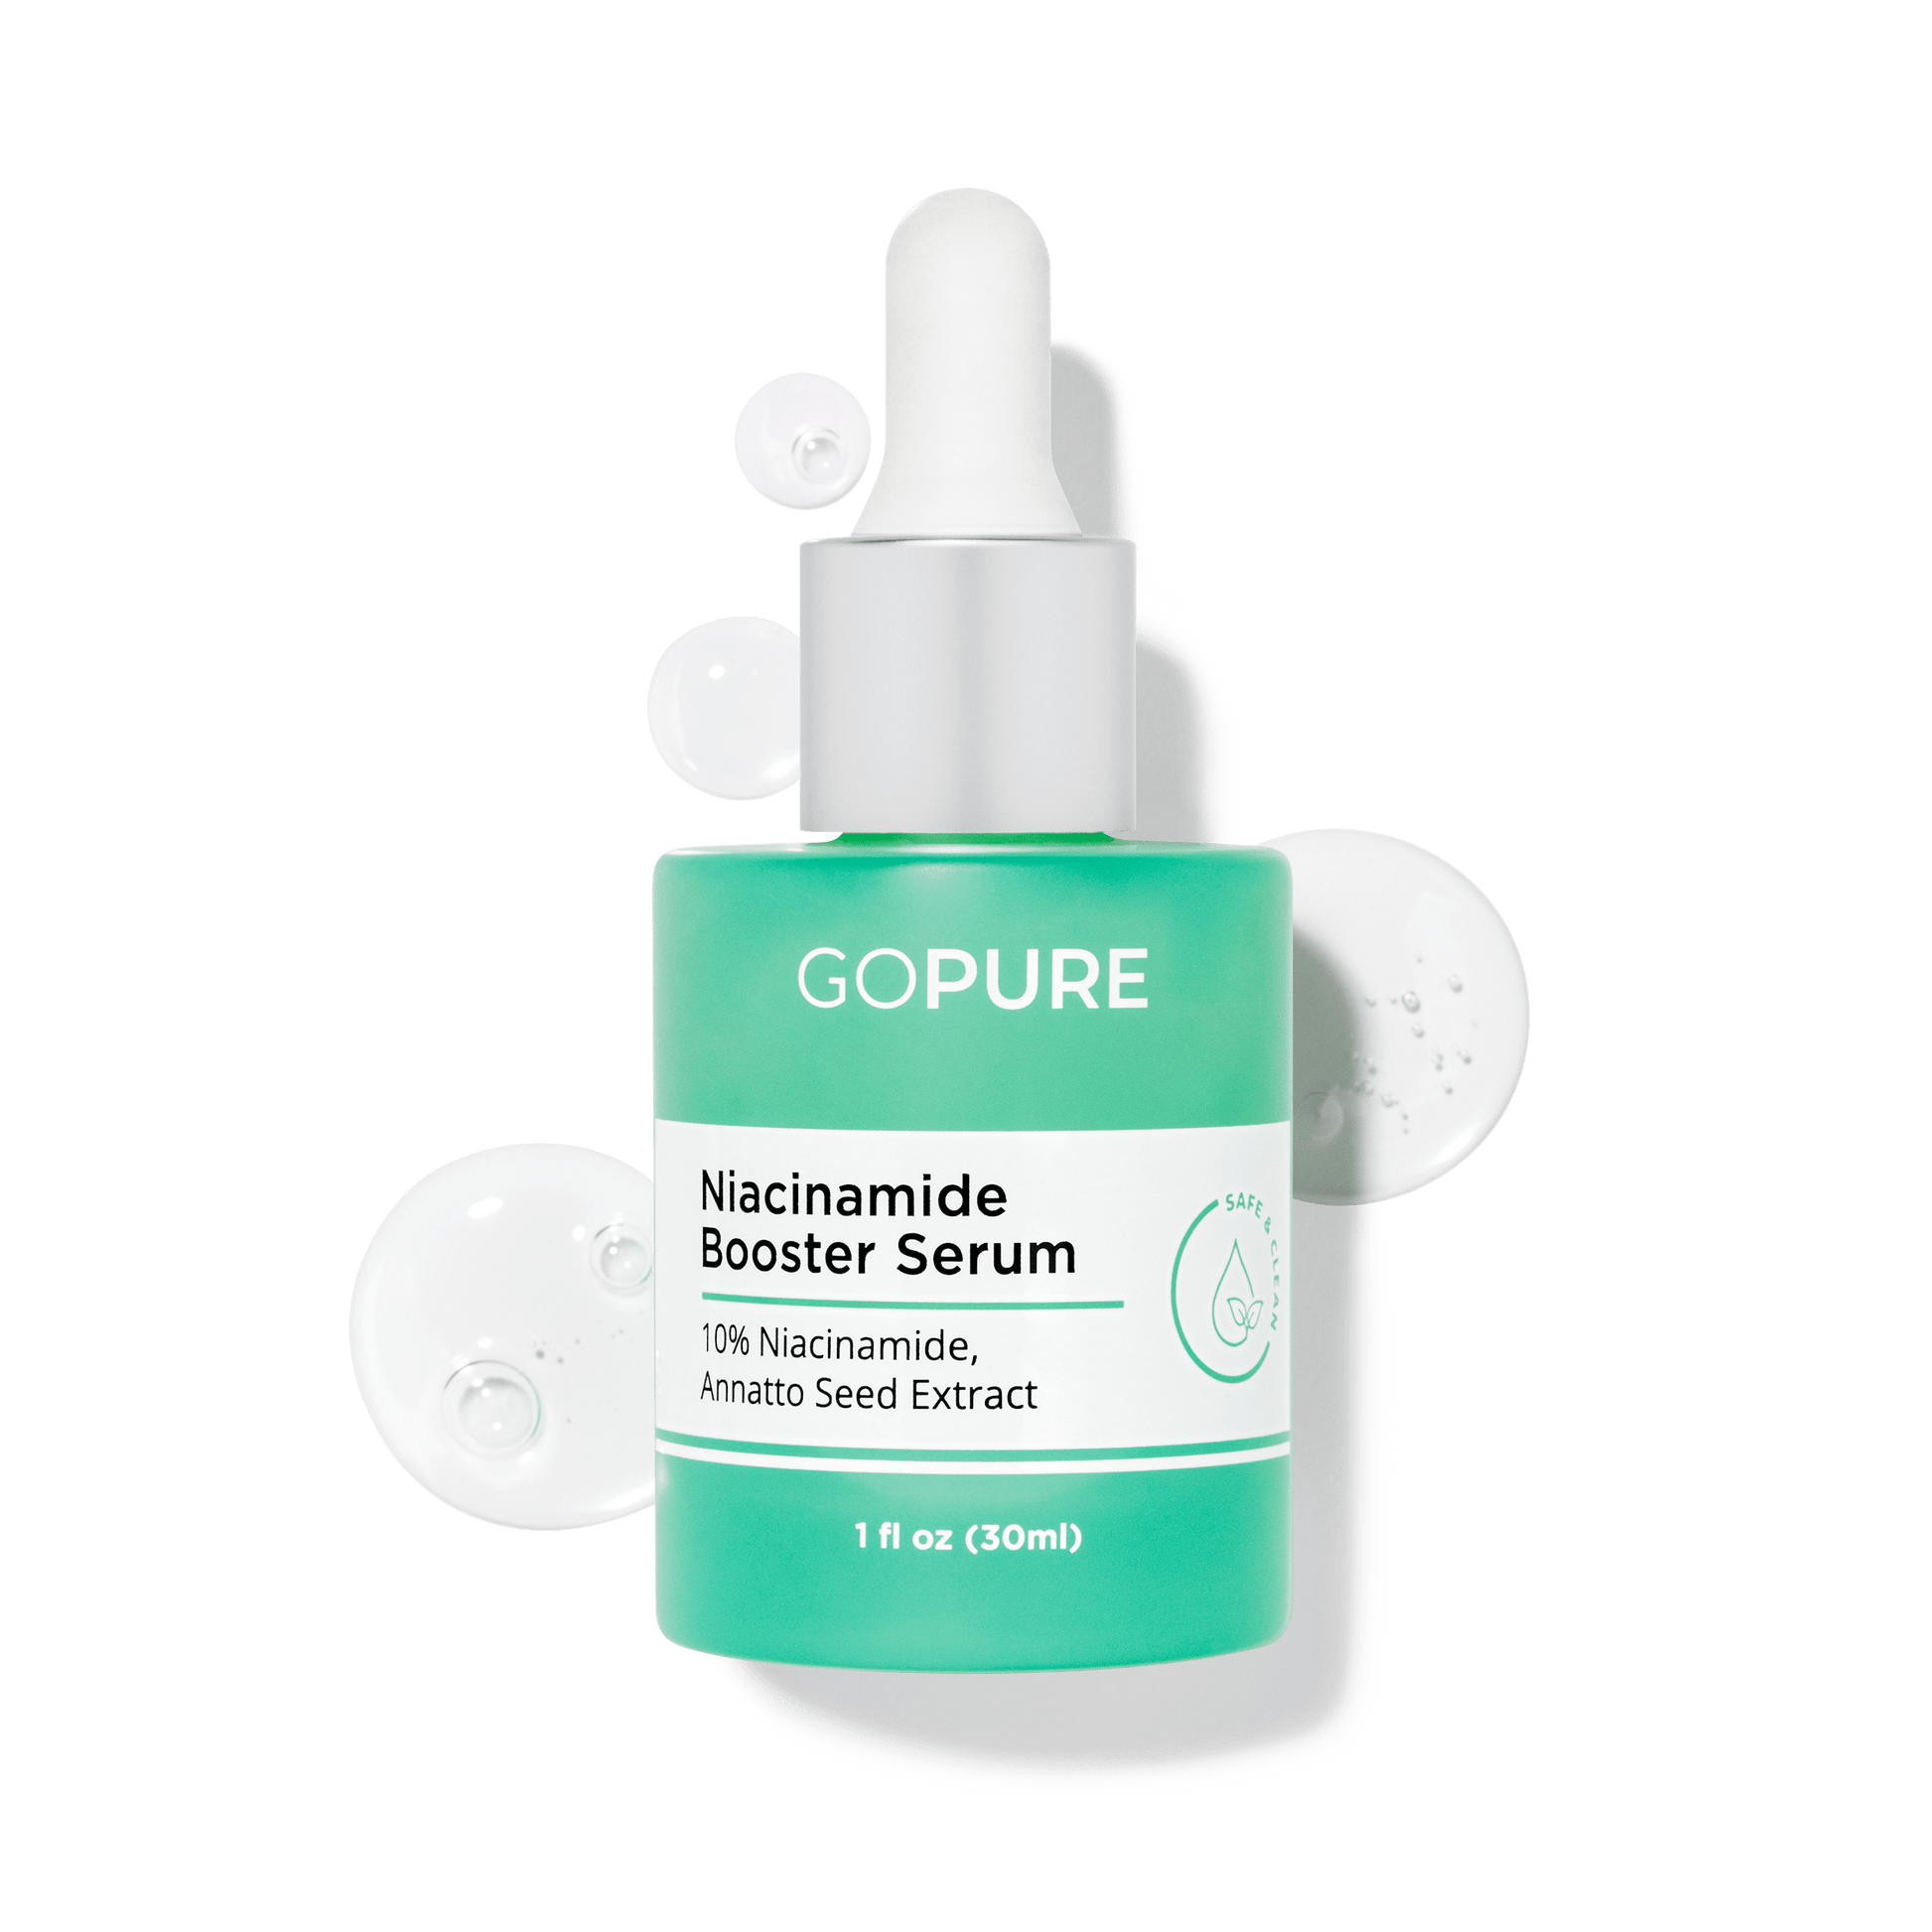 A 1 fl oz green bottle of GoPure's Niacinamide Booster Serum with ingredients like Niacinamide and Annatto Seed Extract.